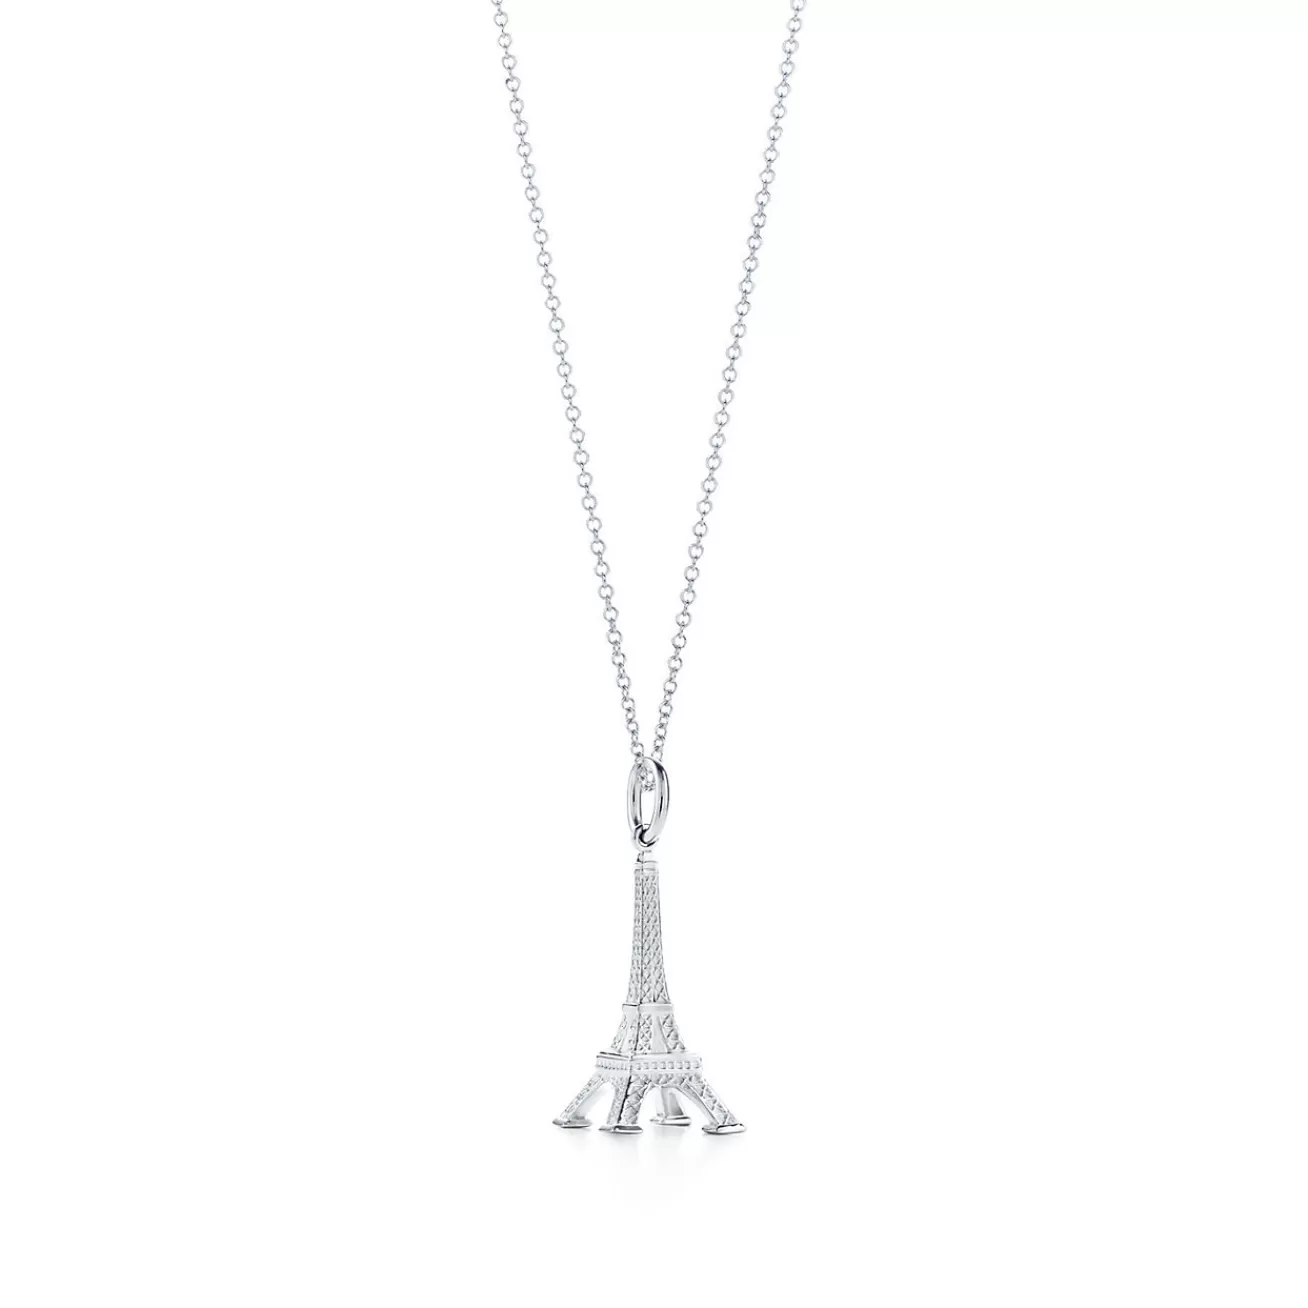 Tiffany & Co. Eiffel Tower charm in sterling silver on a chain. | ^ Sterling Silver Jewelry